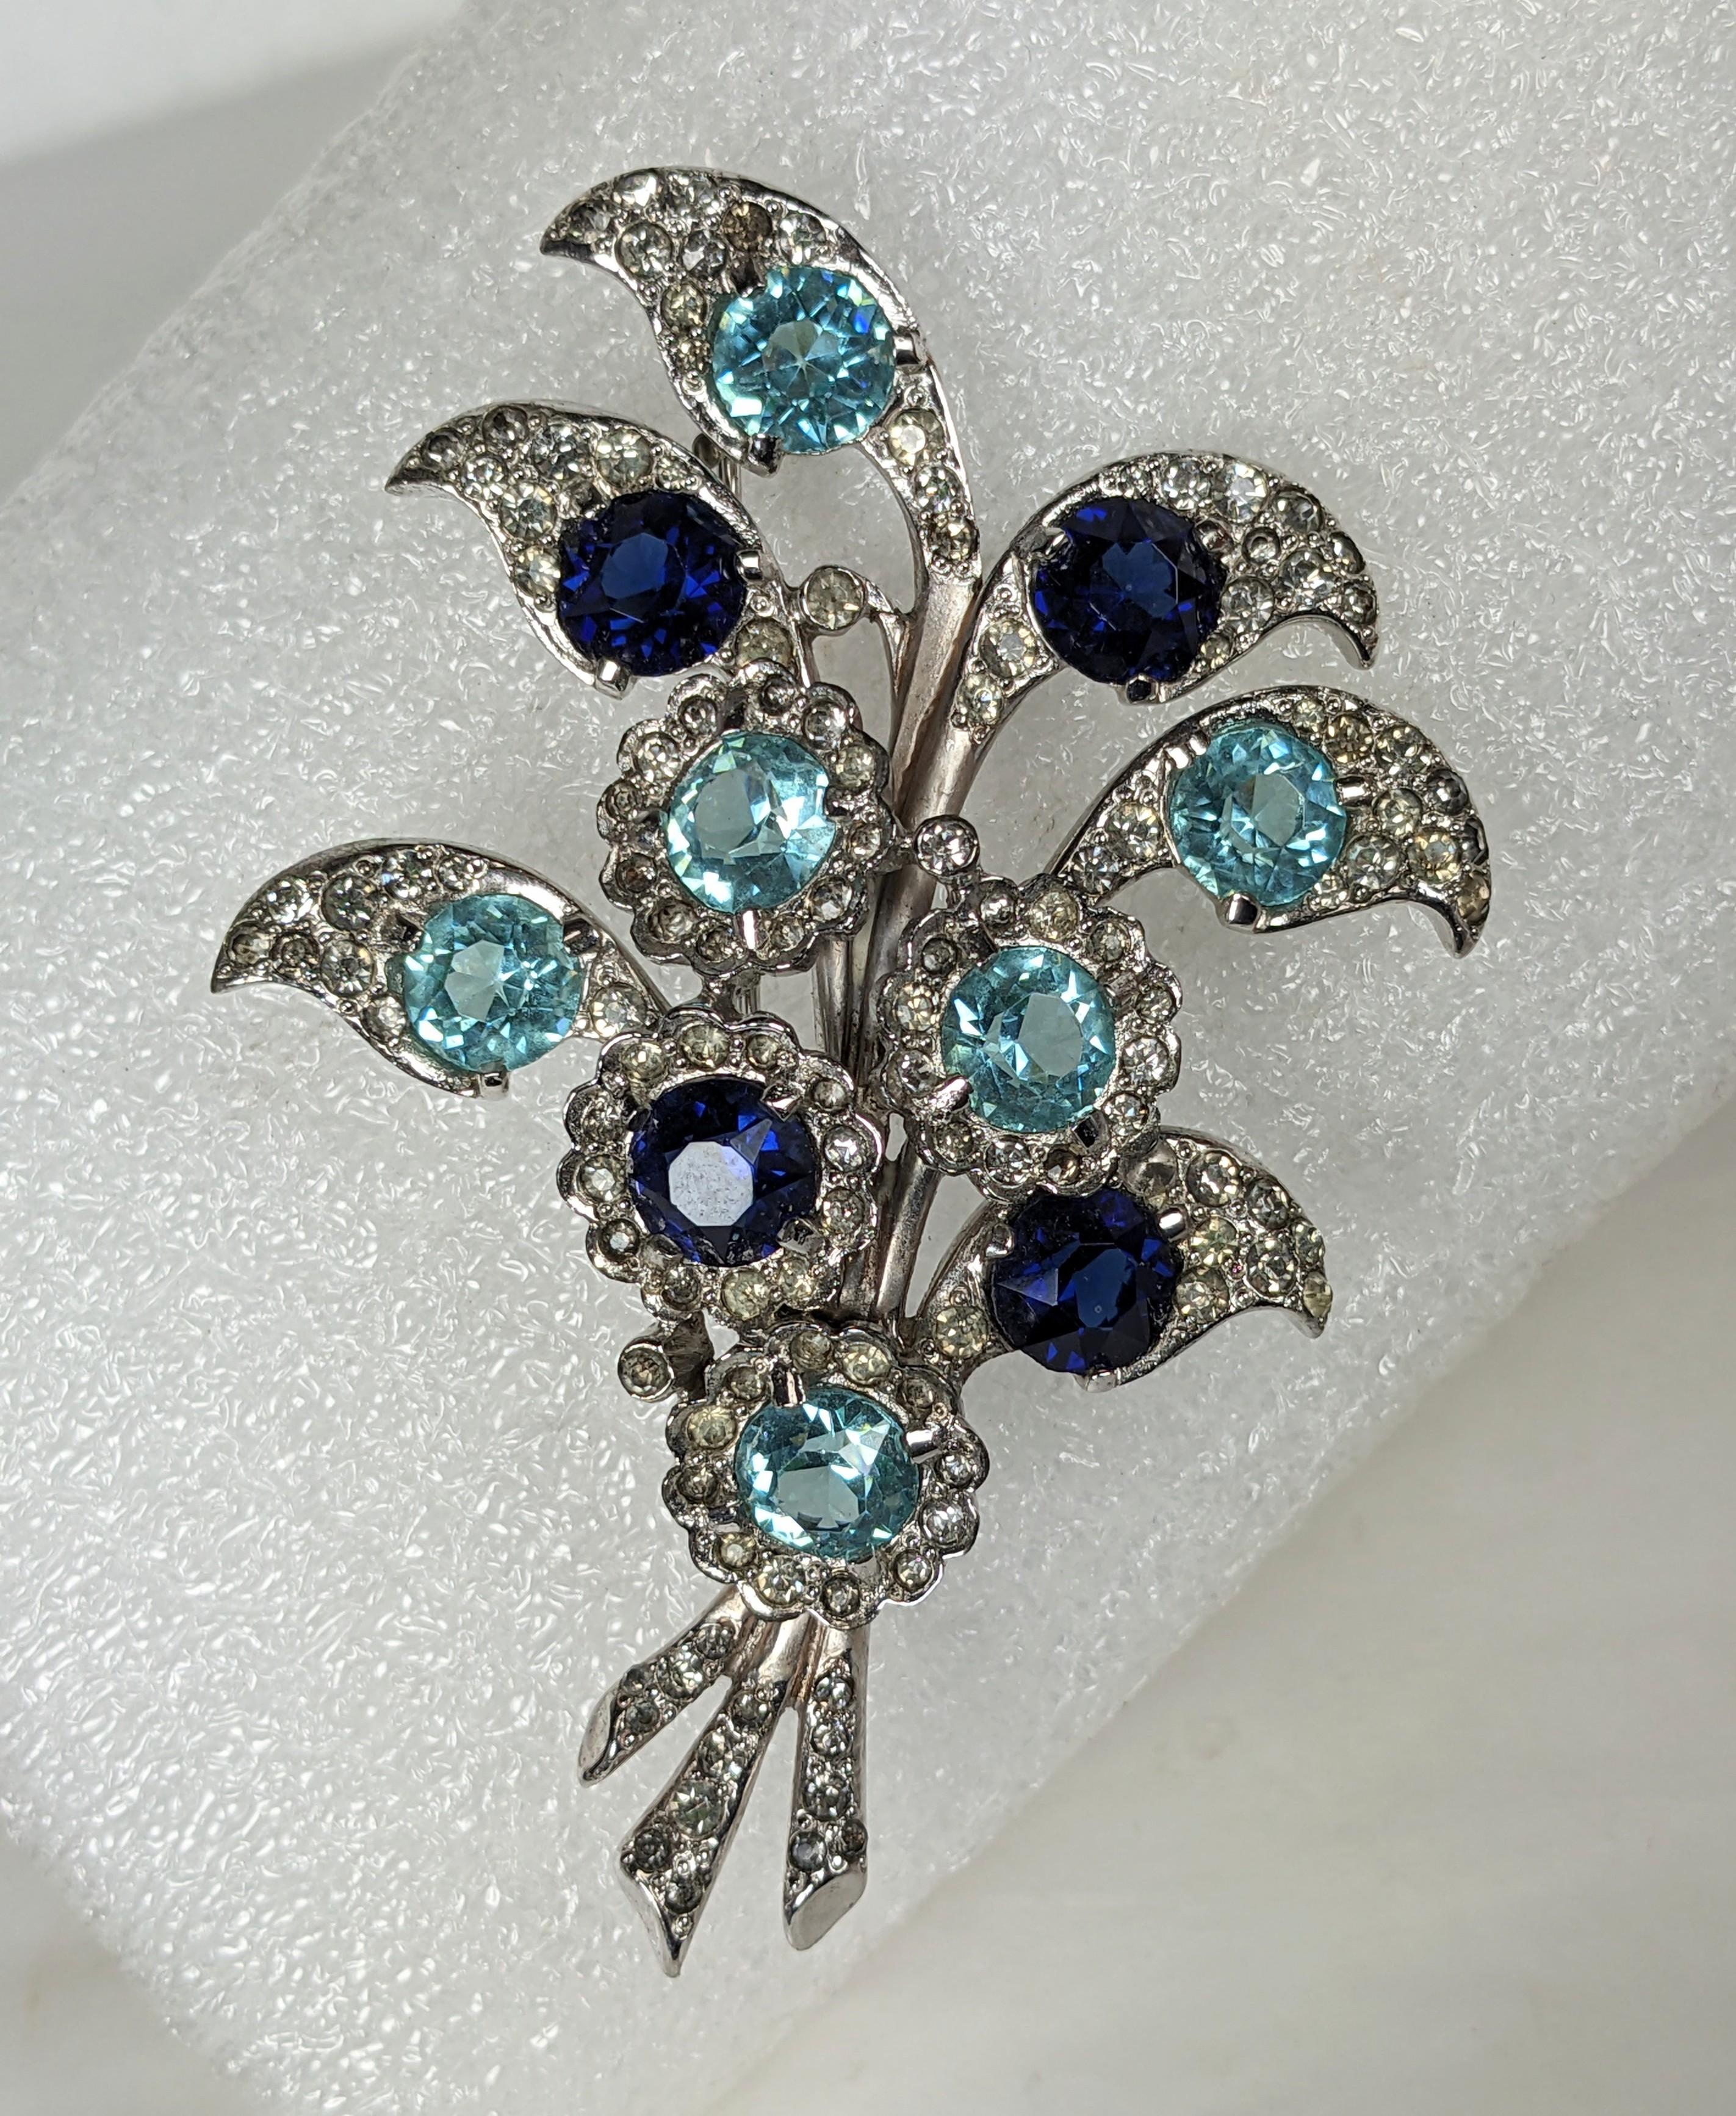 Marcel Boucher leafy floral spray brooch of crystal rhinestone pave, faux aquamarine and sapphire round chatons set in rhodium plated base metal, 1940s USA. Excellent Condition. 
Marked: MB (phrygian cap), 3.50